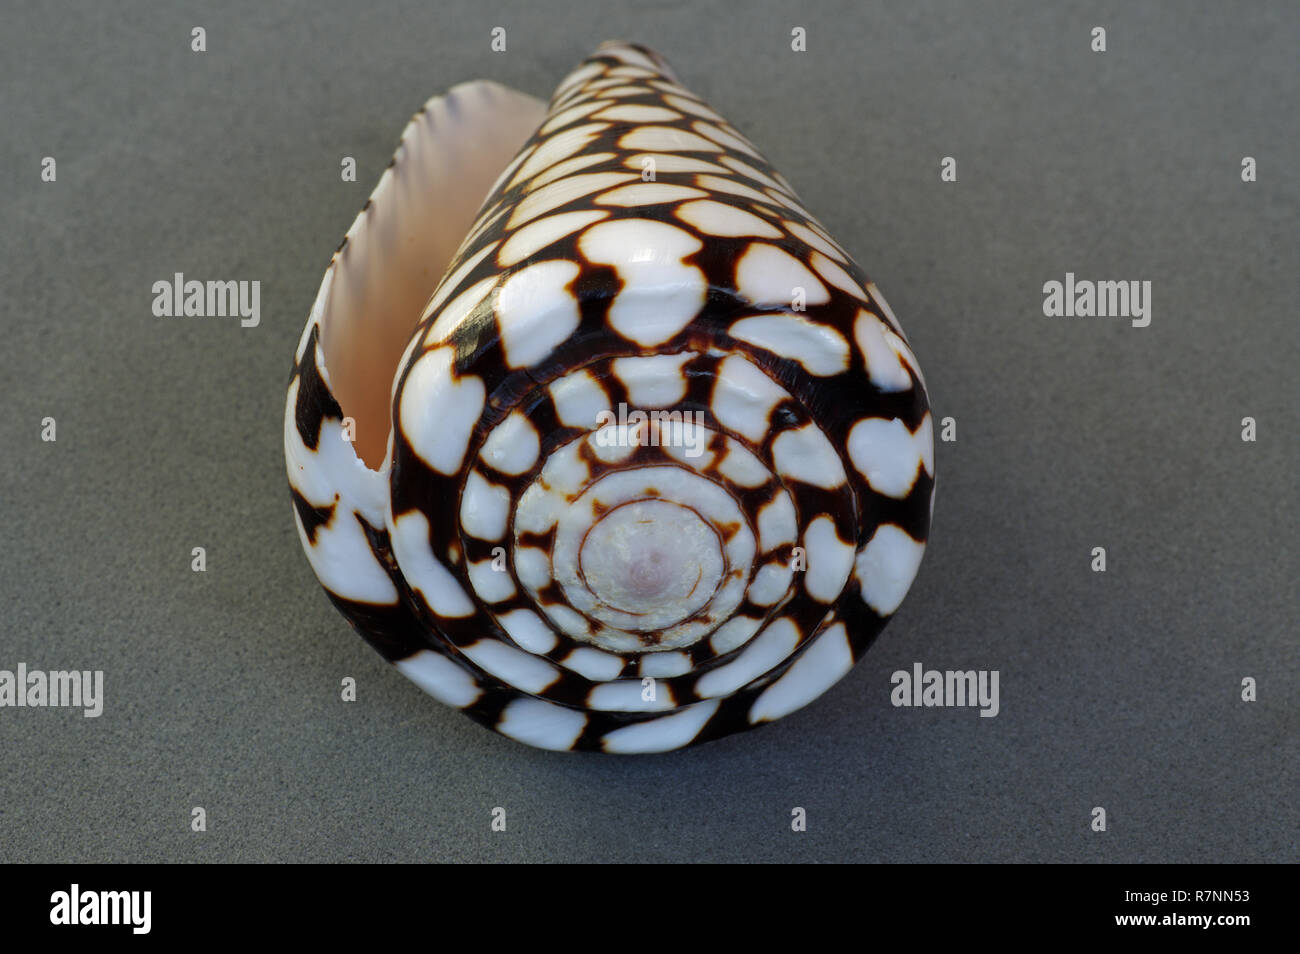 the shell of the Sea snail Conus marmoreus, the Marbled Cone snail, order Conidae Stock Photo